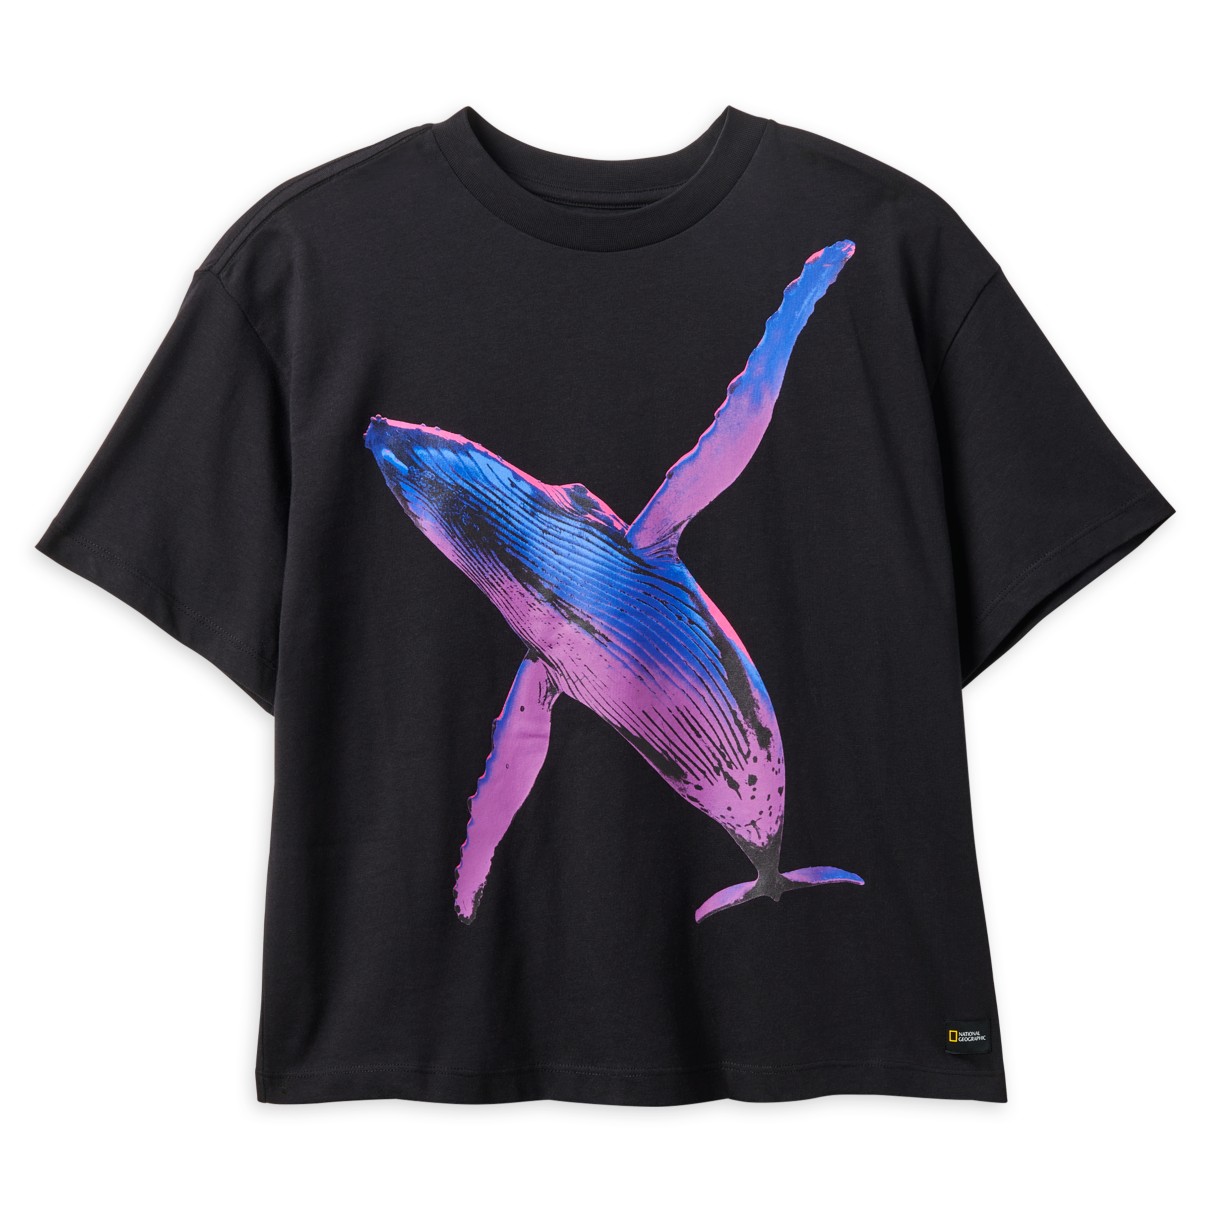 National Geographic Whale T-Shirt for Women